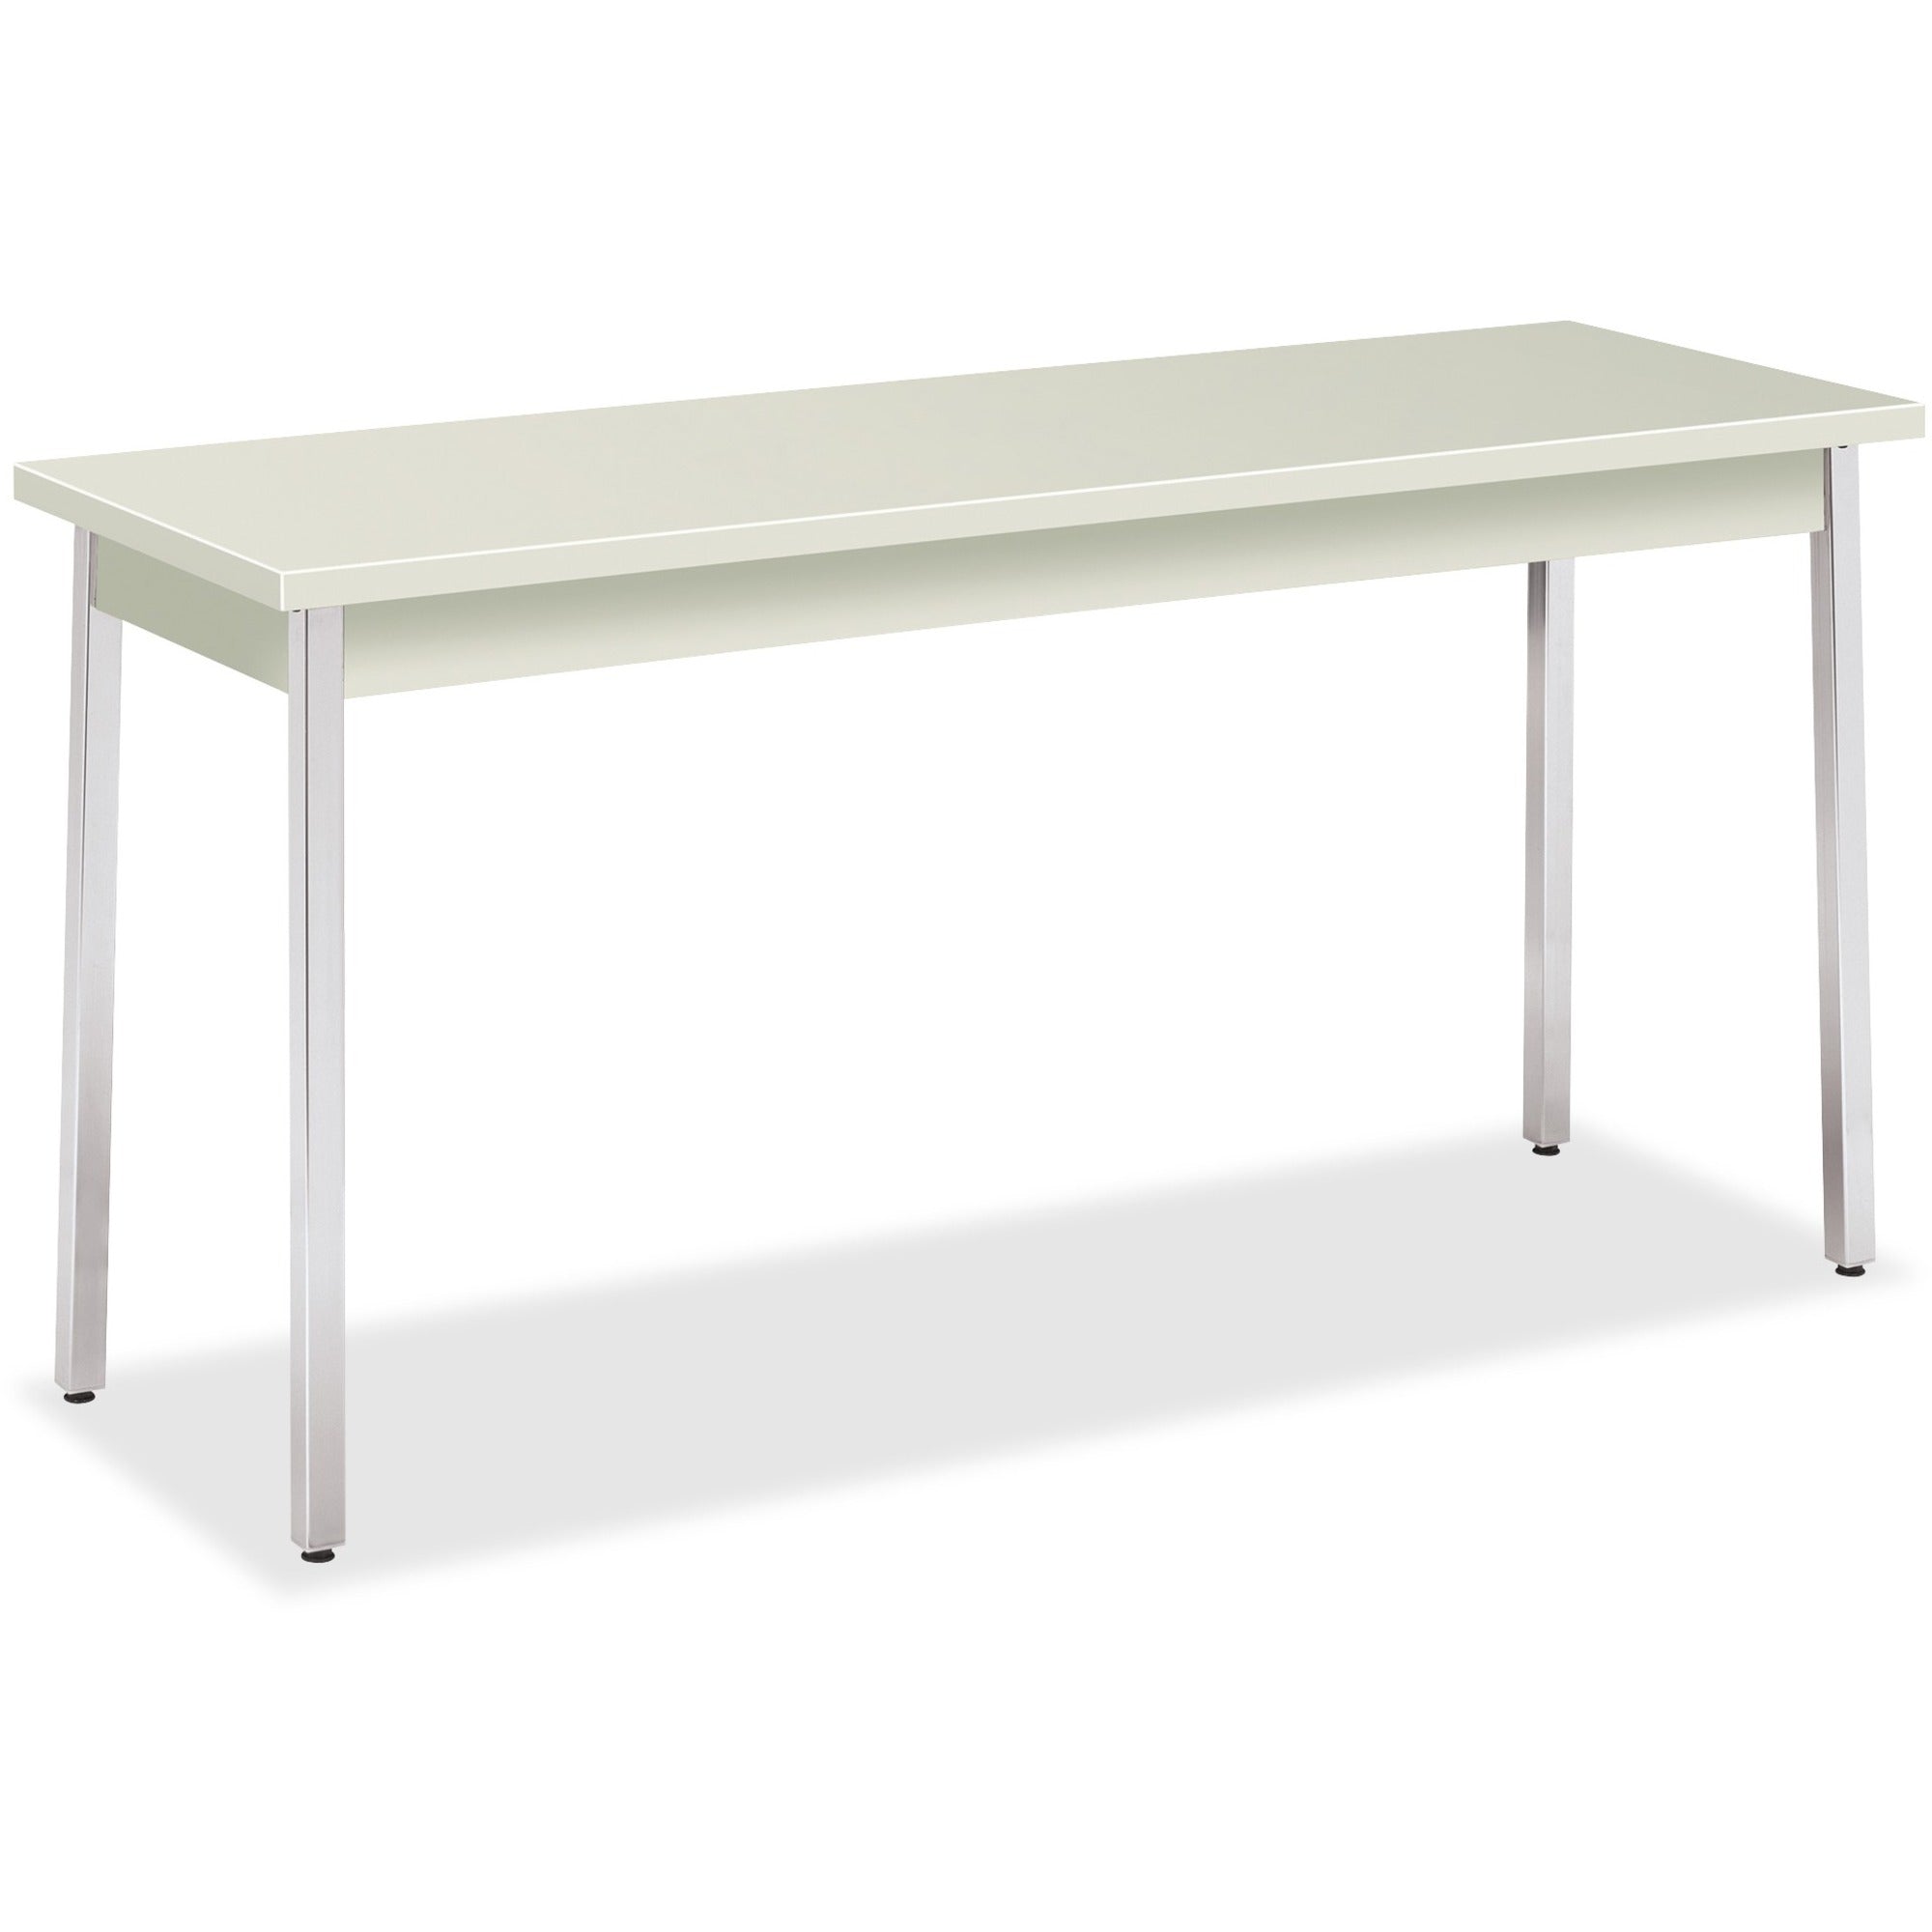 HON Utility Table, 60"W x 20"D - For - Table TopNatural Rectangle Top - Chrome Four Leg Base - 4 Legs x 60" Table Top Width x 20" Table Top Depth x 1.13" Table Top Thickness - 29" Height - Assembly Required - 1 Each